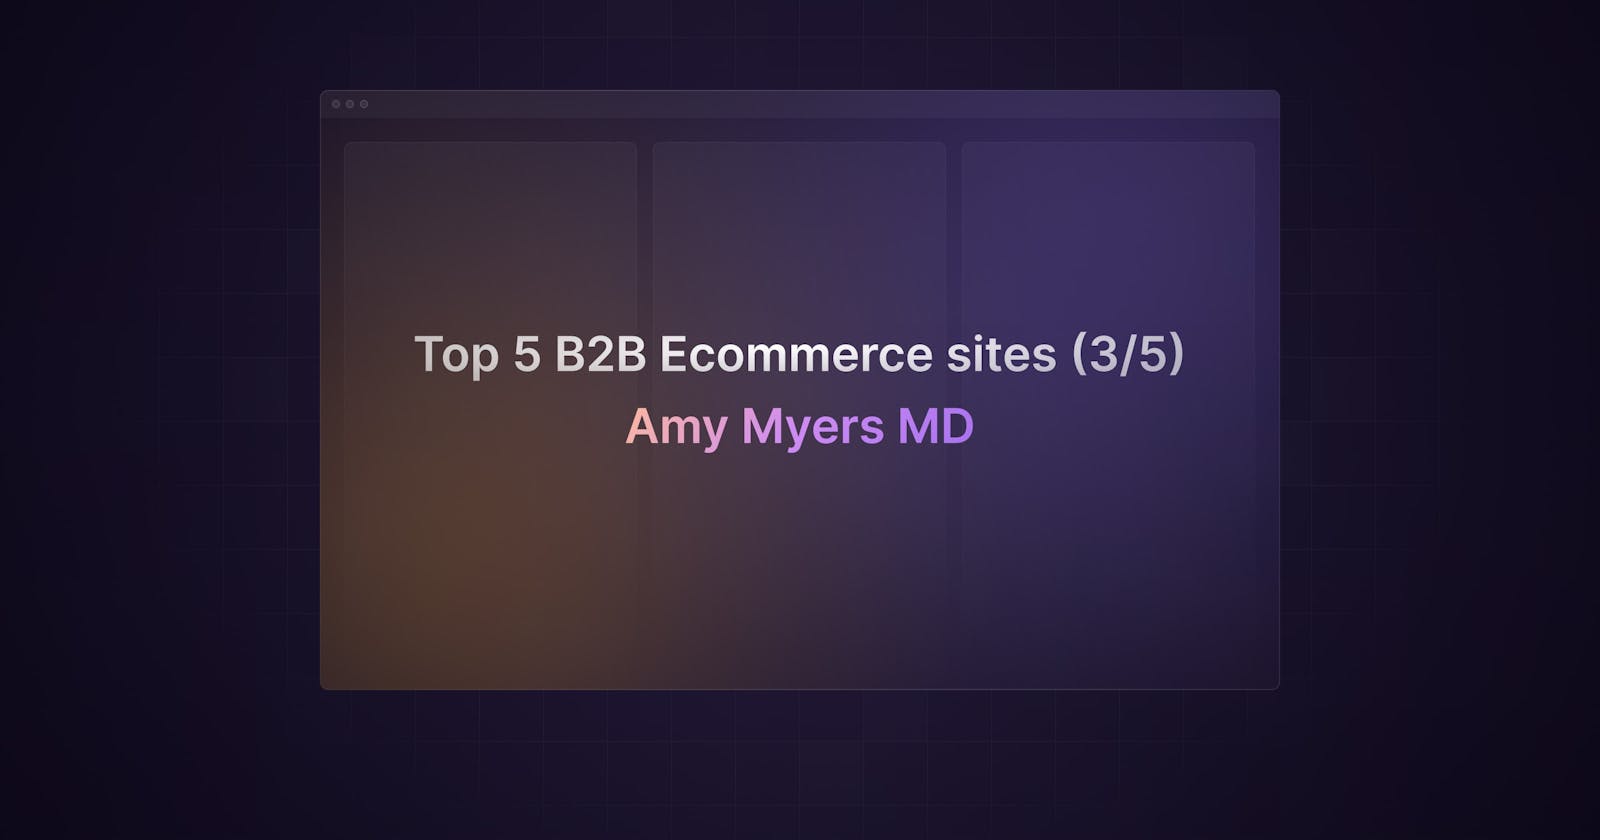 Top 5 B2B ecommerce UX cases: Amy Myers MD (3/5)